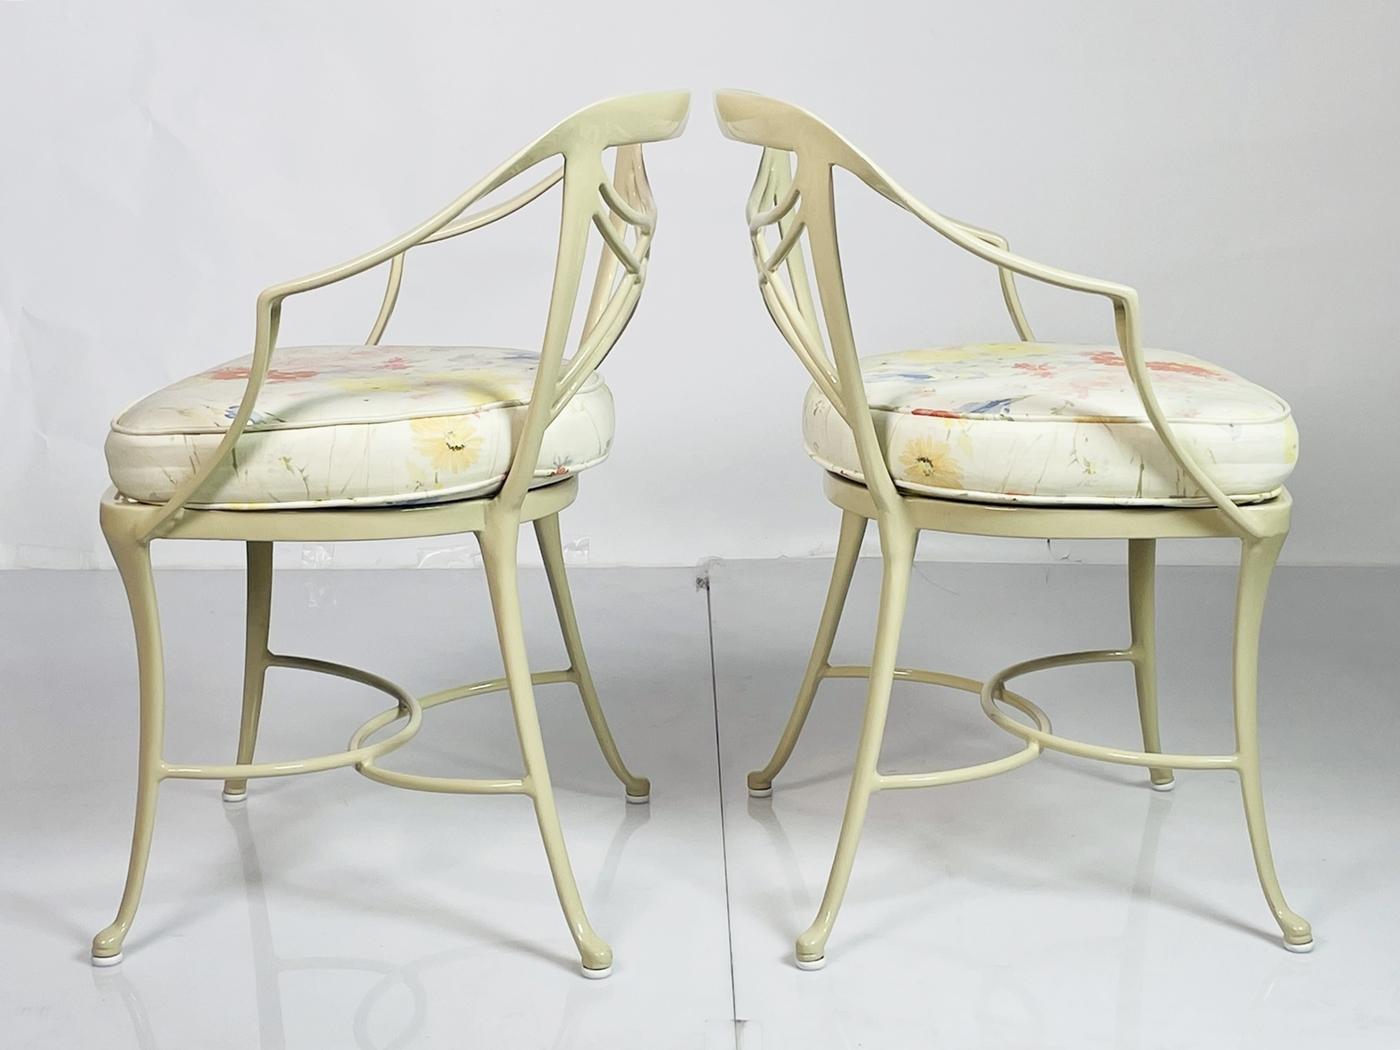 Vintage Dining Set - Four Armchairs & Table - by Brown-Jordan, USA 1970's For Sale 6